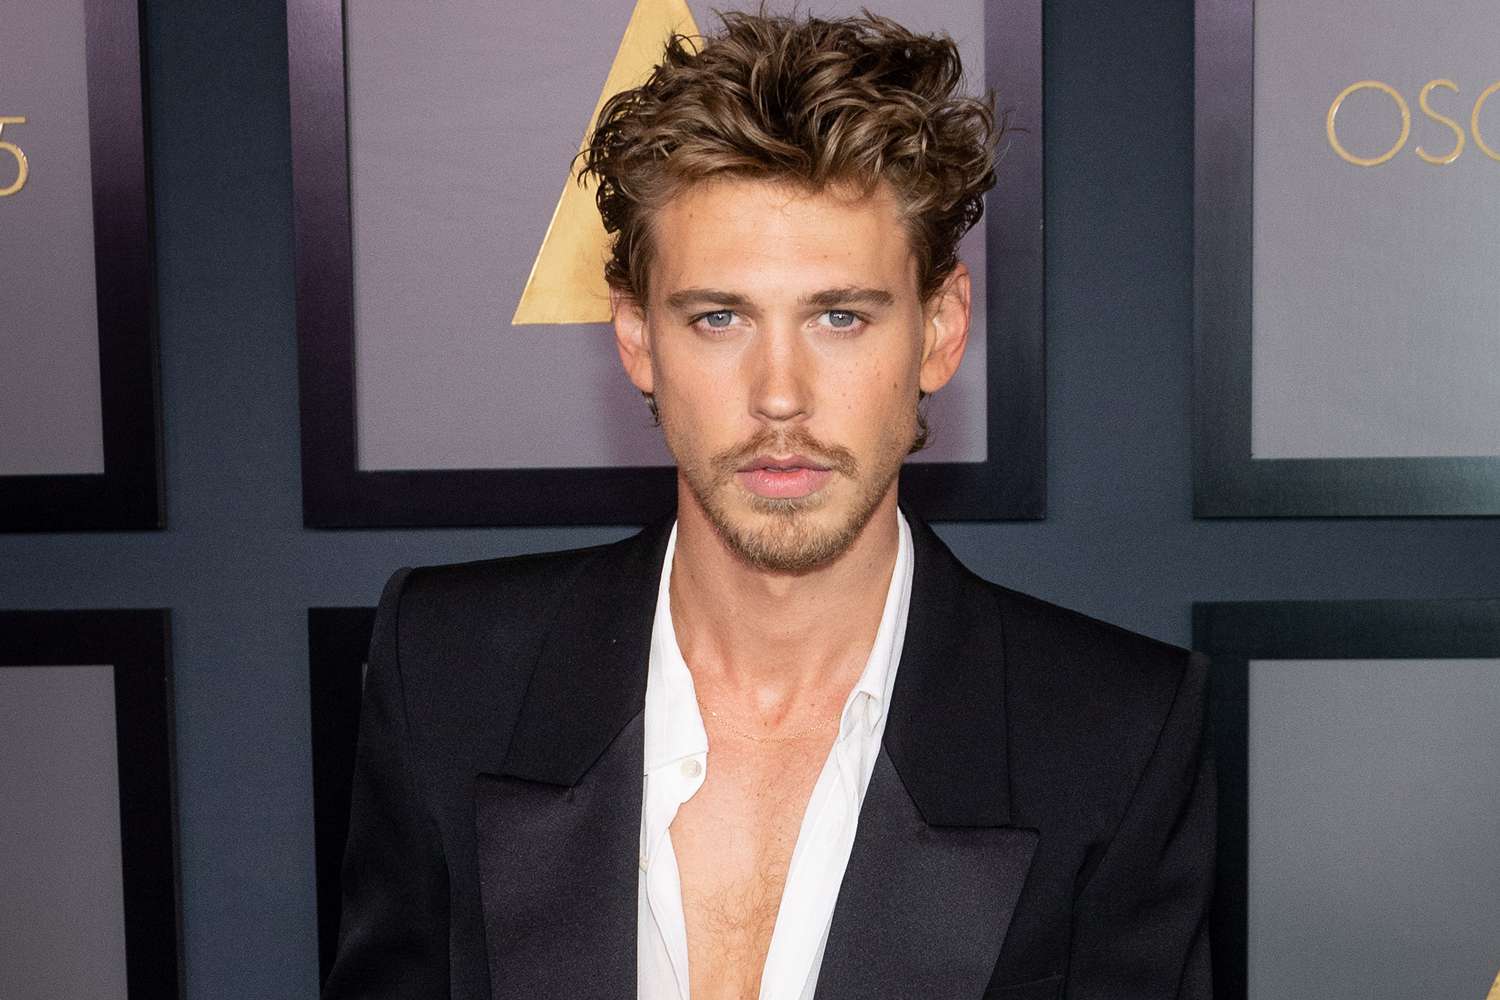 Austin Butler - Rising Star In Hollywood's New Generation